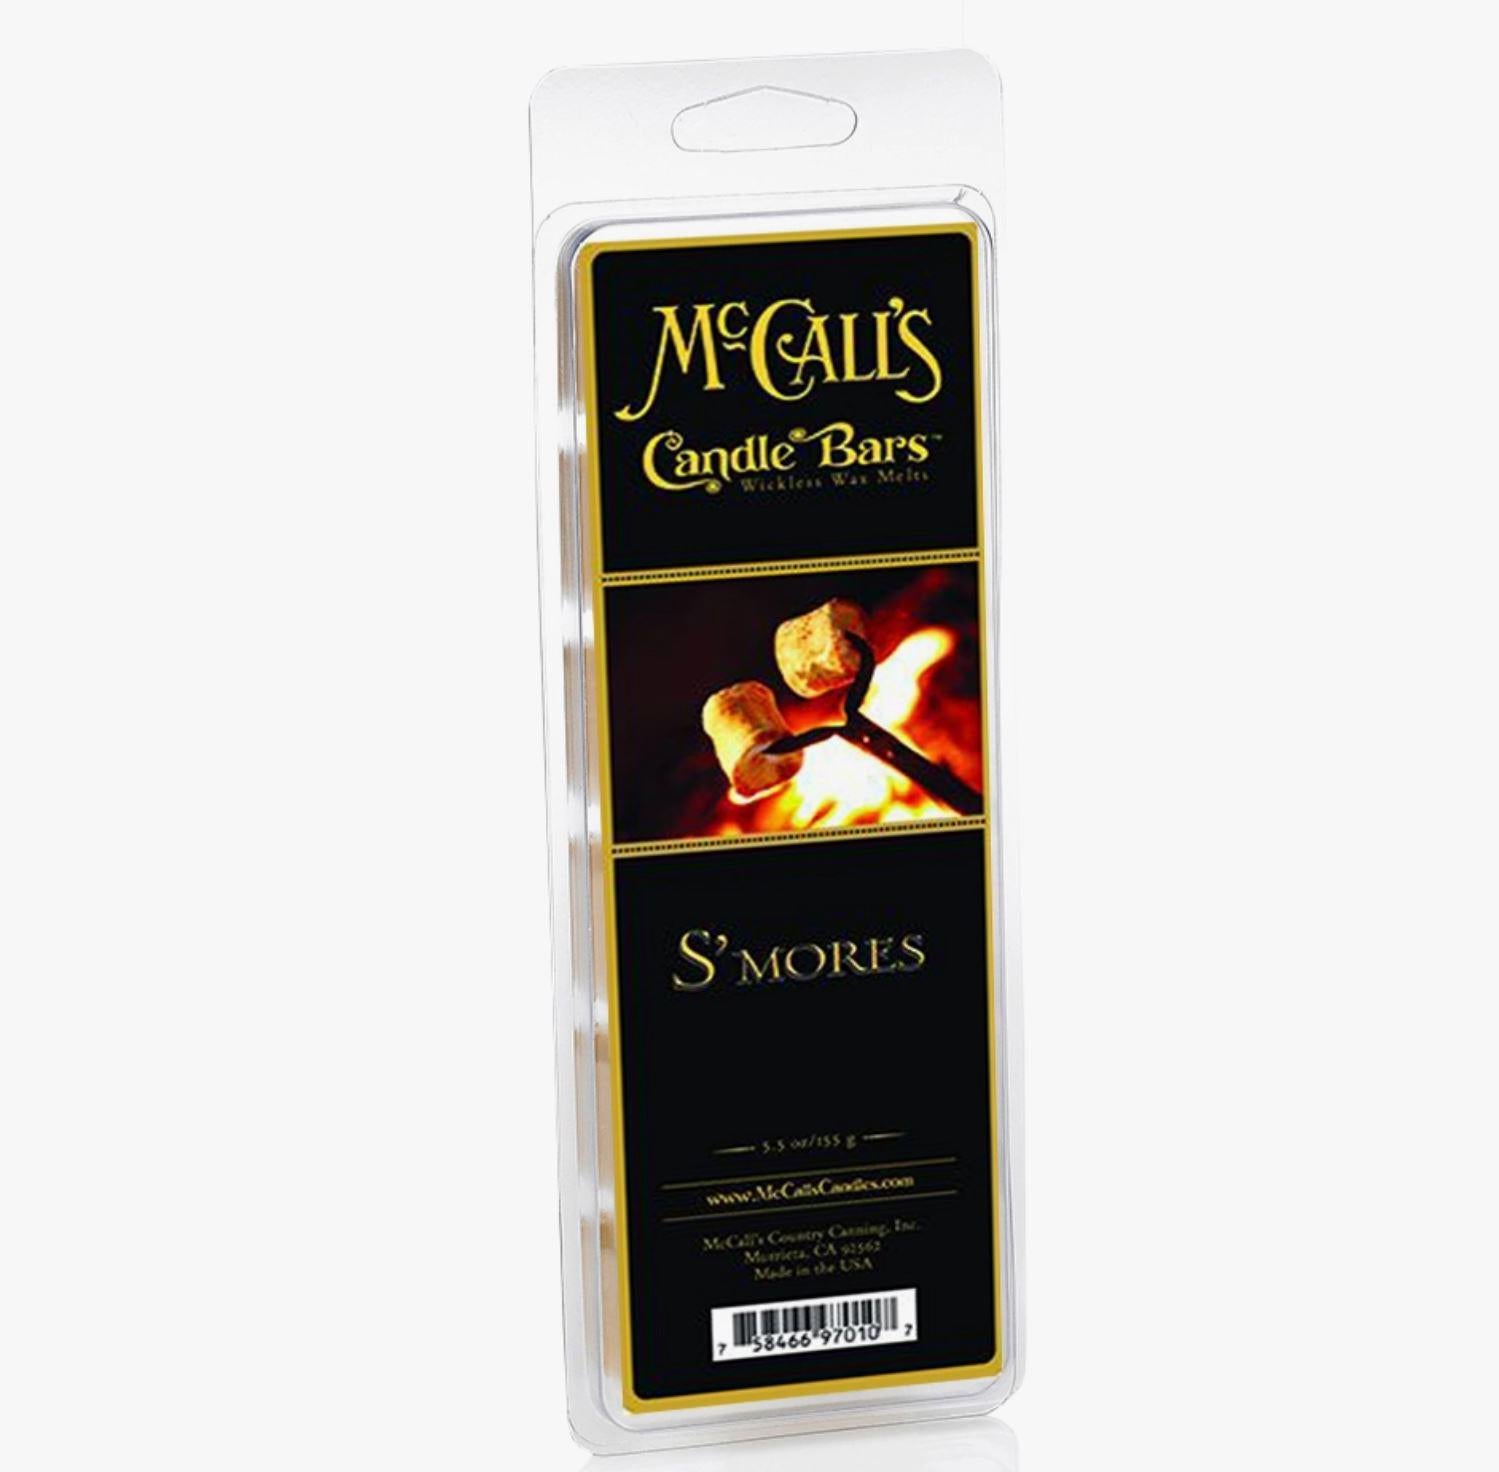 McCall's Candle Bars Wax Melts | Smores